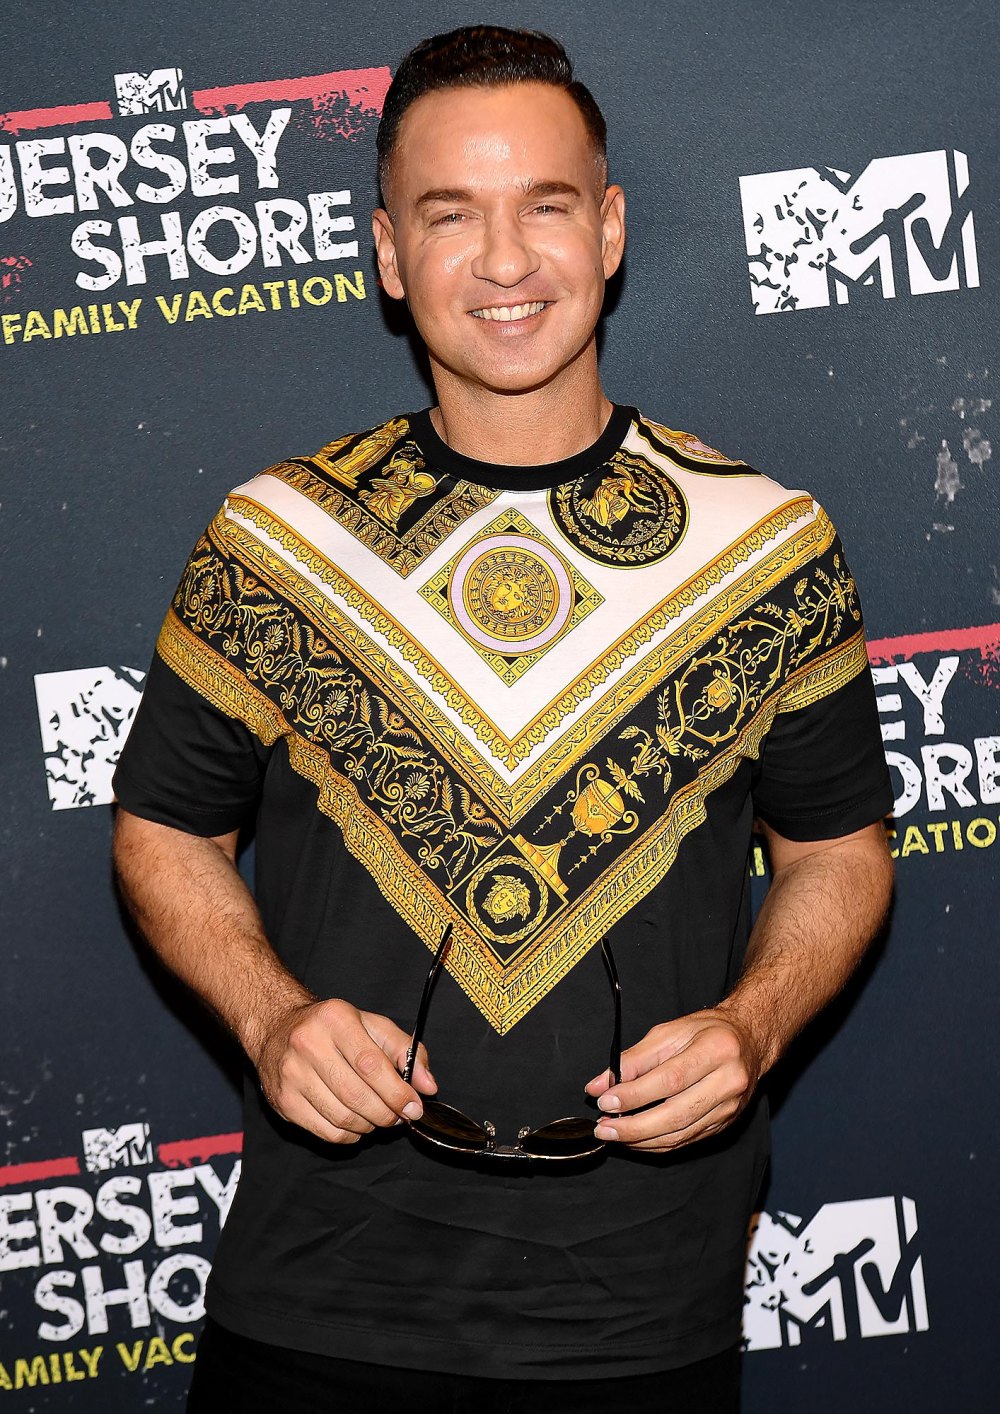 Mike ‘The Situation’ Sorrentino Reveals When His Kids Will Be Allowed to Watch ‘Jersey Shore’